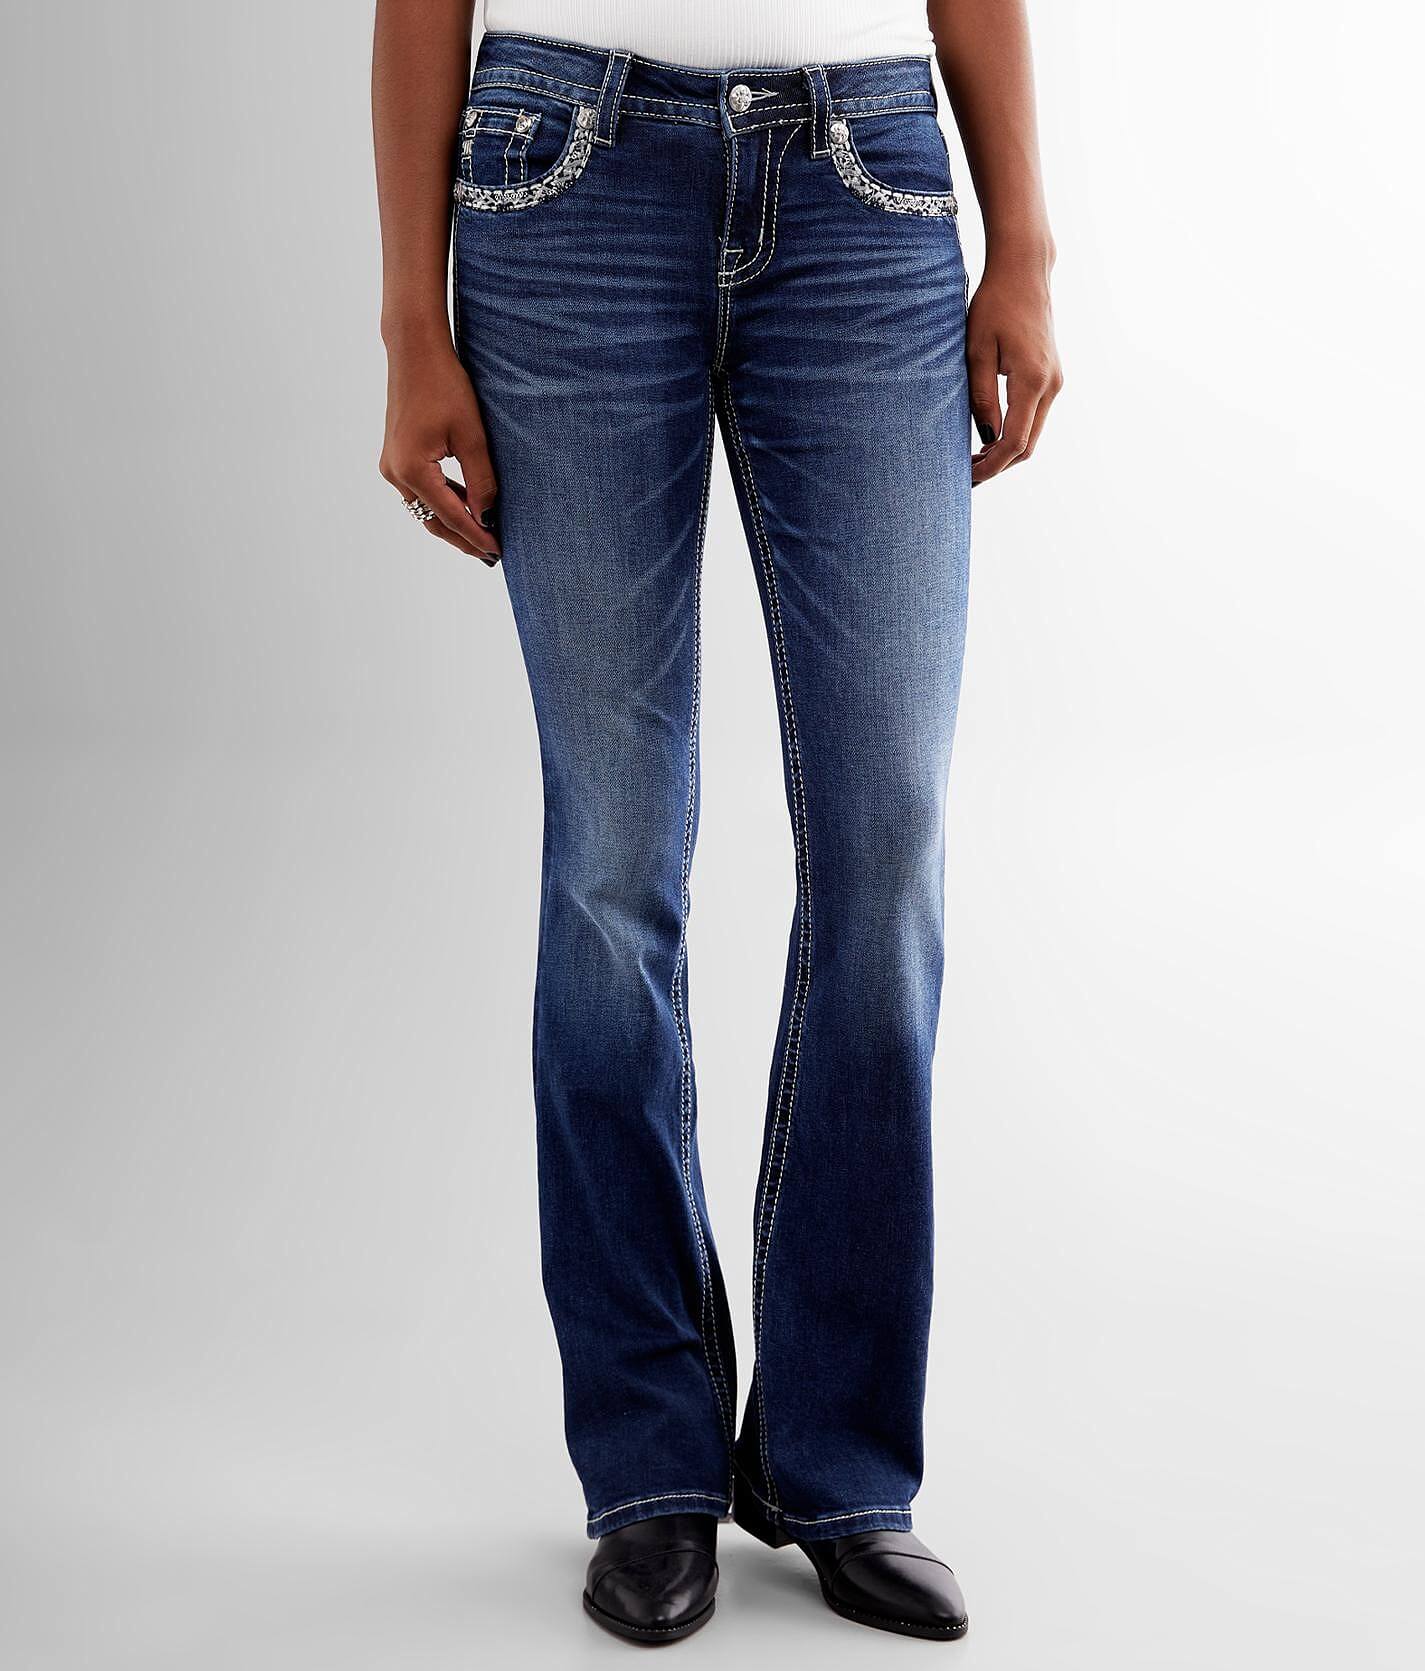 miss me jeans canada online